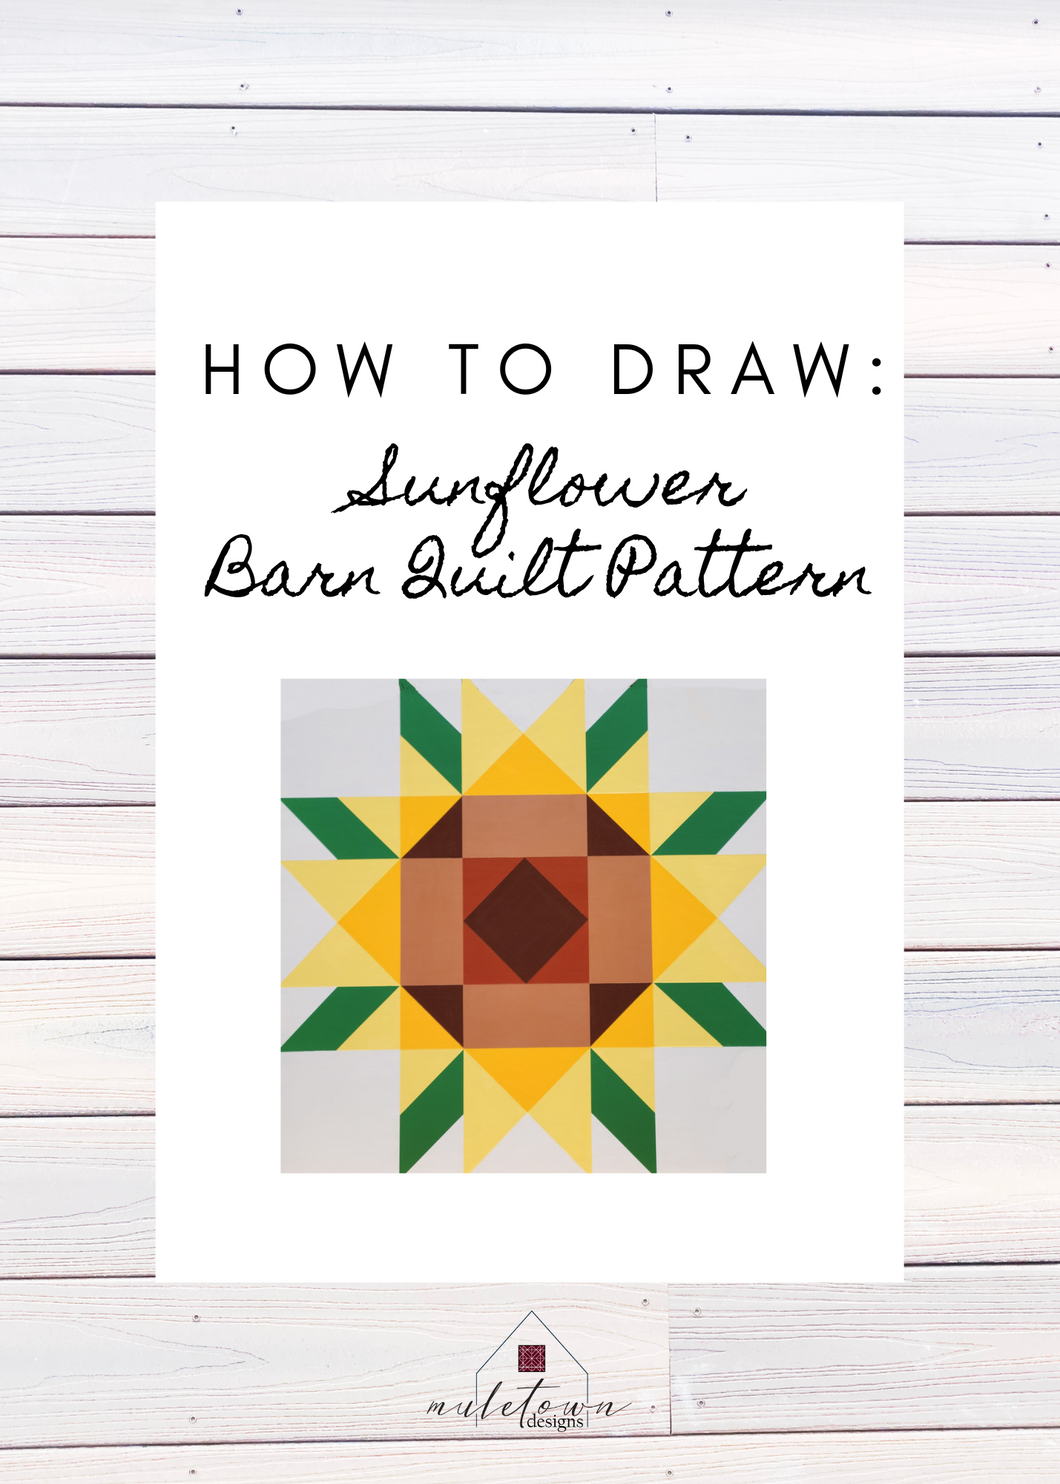 Sunflower Quilt Pattern for Barn Quilts in yellow, green, brown, DIY instruction pattern